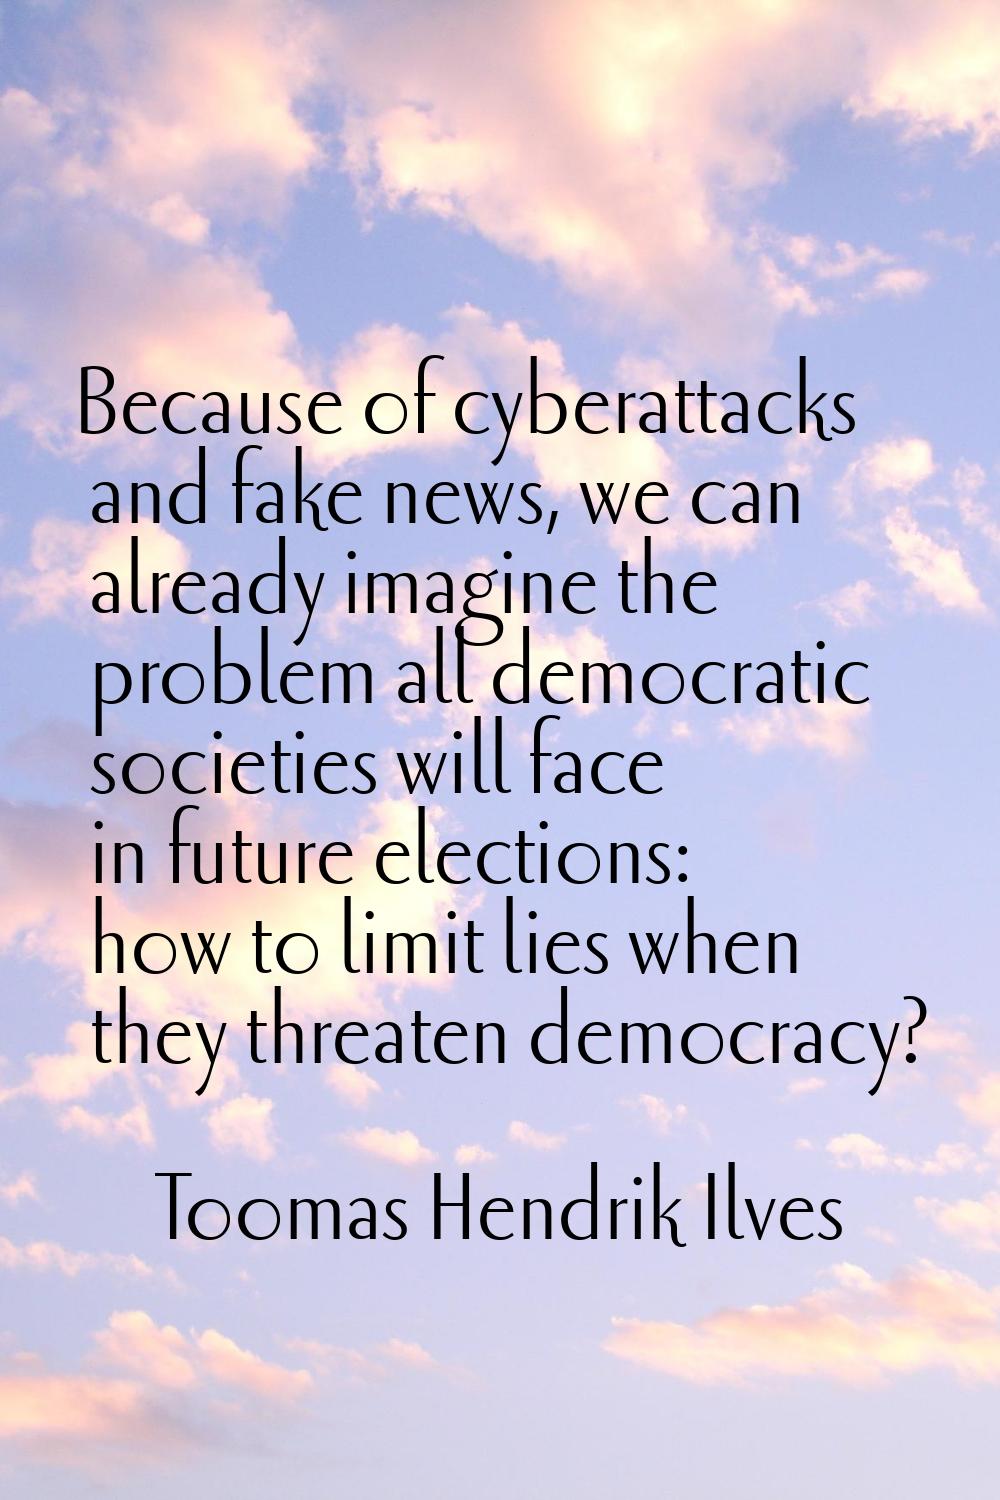 Because of cyberattacks and fake news, we can already imagine the problem all democratic societies 